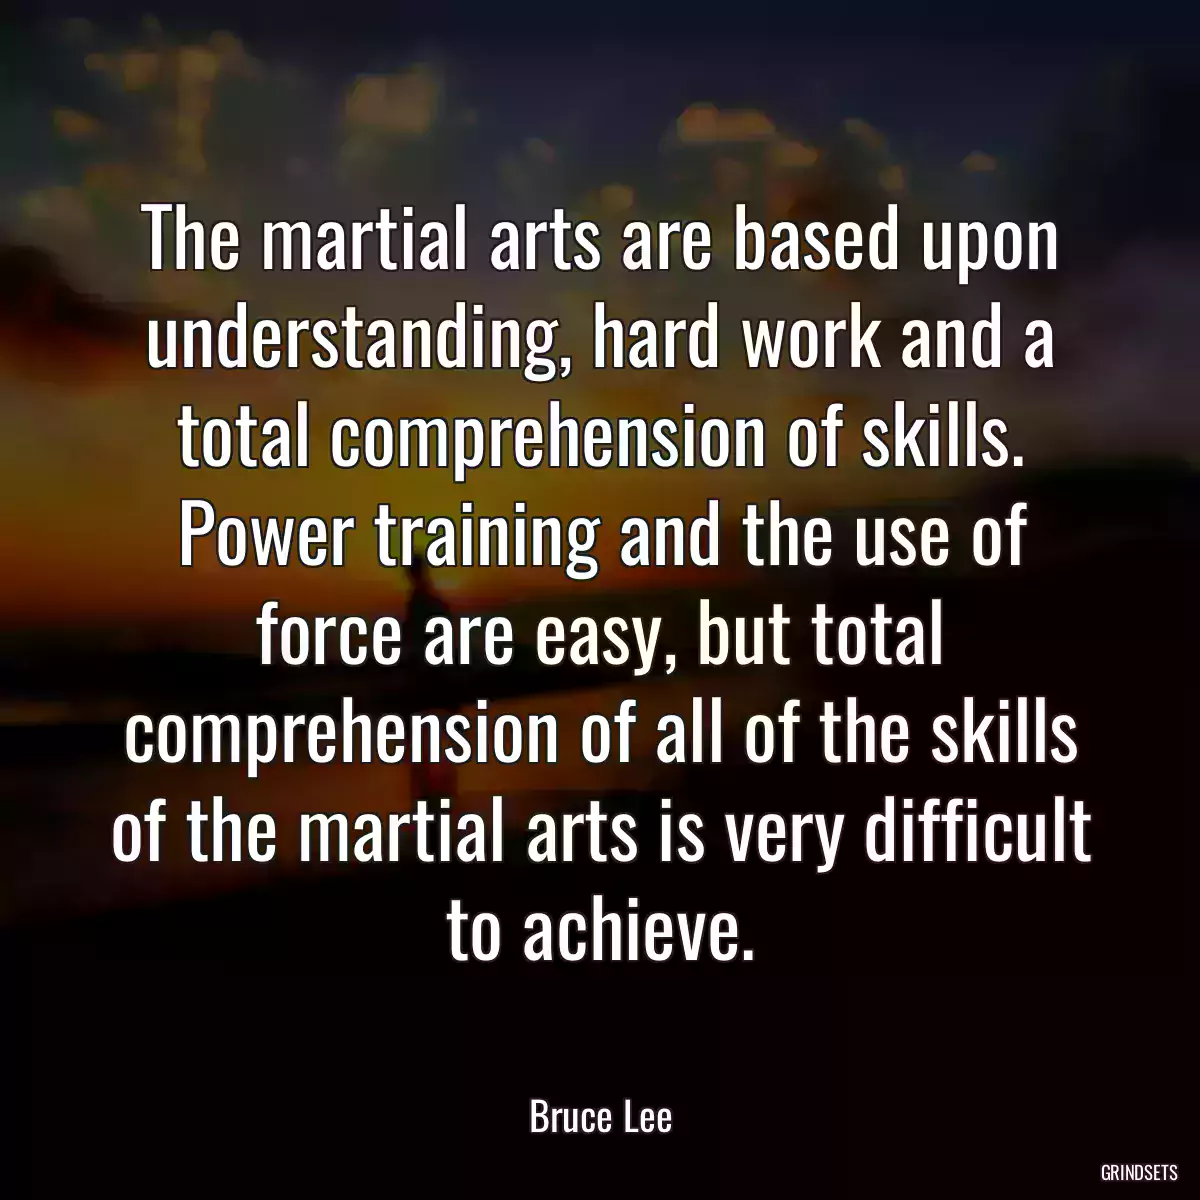 The martial arts are based upon understanding, hard work and a total comprehension of skills. Power training and the use of force are easy, but total comprehension of all of the skills of the martial arts is very difficult to achieve.